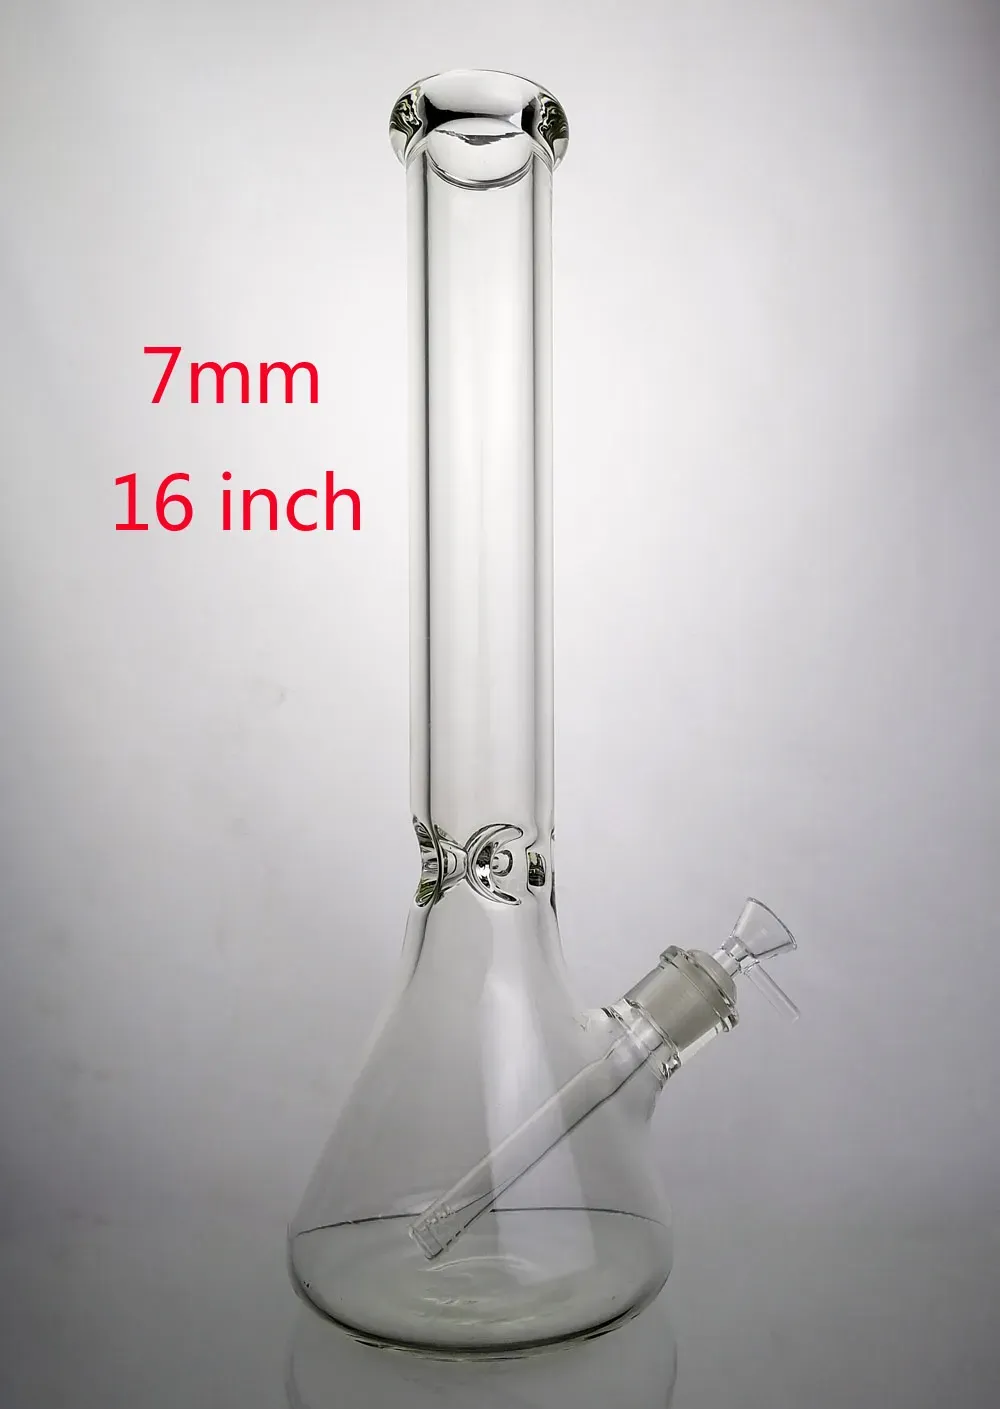 7mm Bongs 20 Inch Glass Water Bong Hookahs 16inch Pipe Beaker Oil Rig with 14mm Bowl Piece Downstem